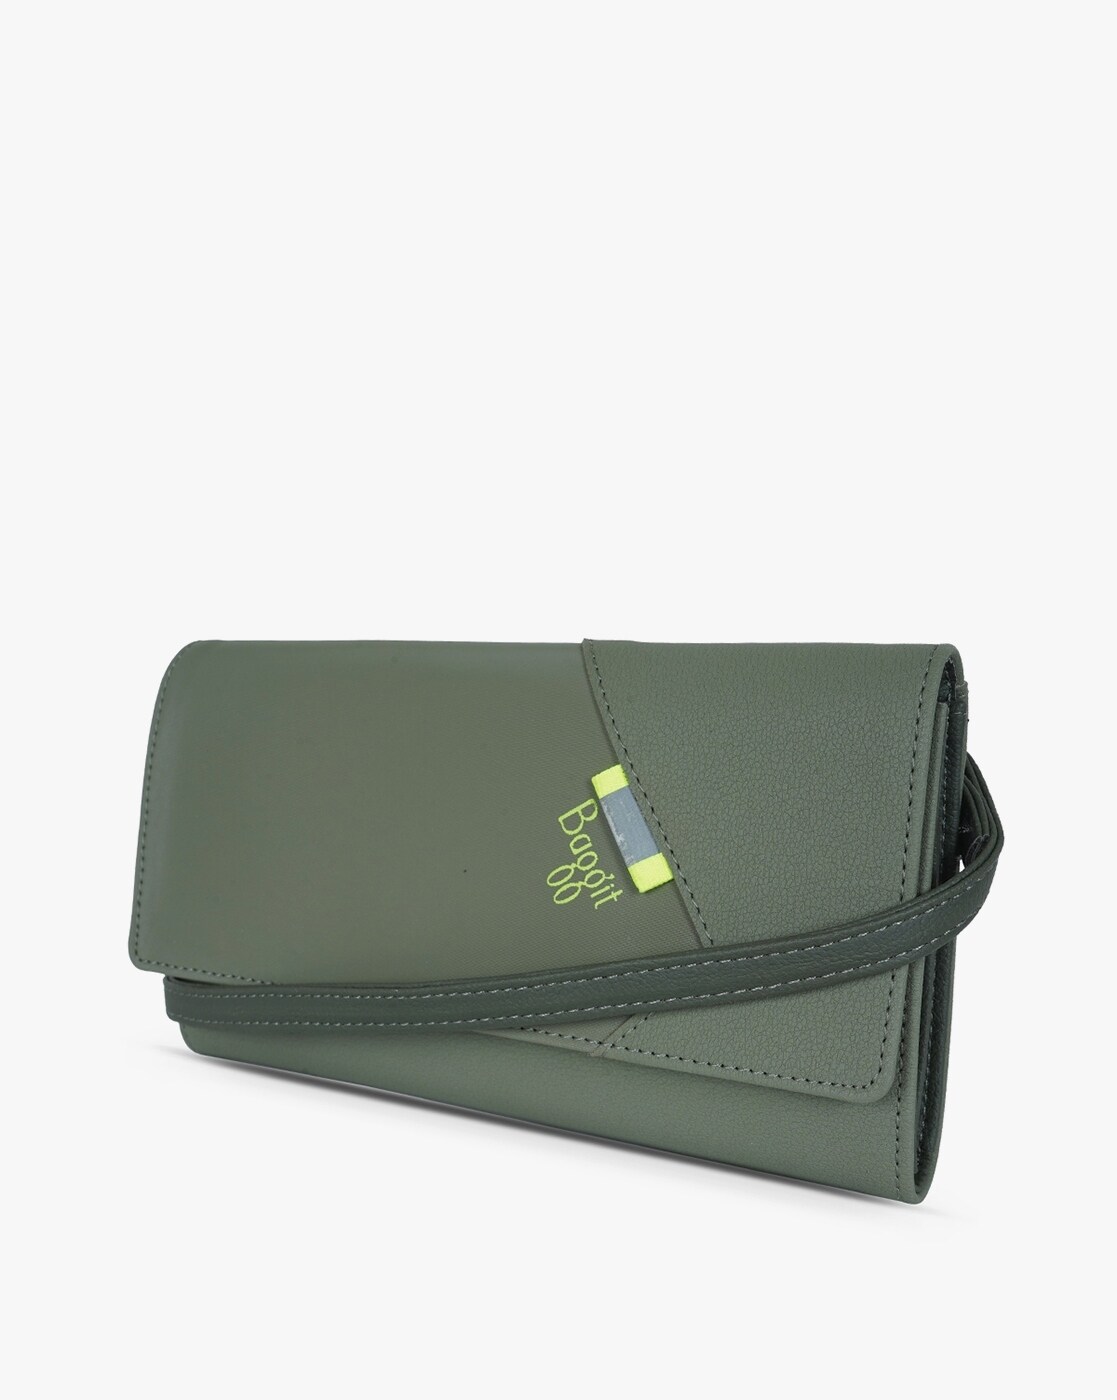 BAGAHOLICBOY SHOPS: 6 Green Compact Wallets For The Lunar New Year